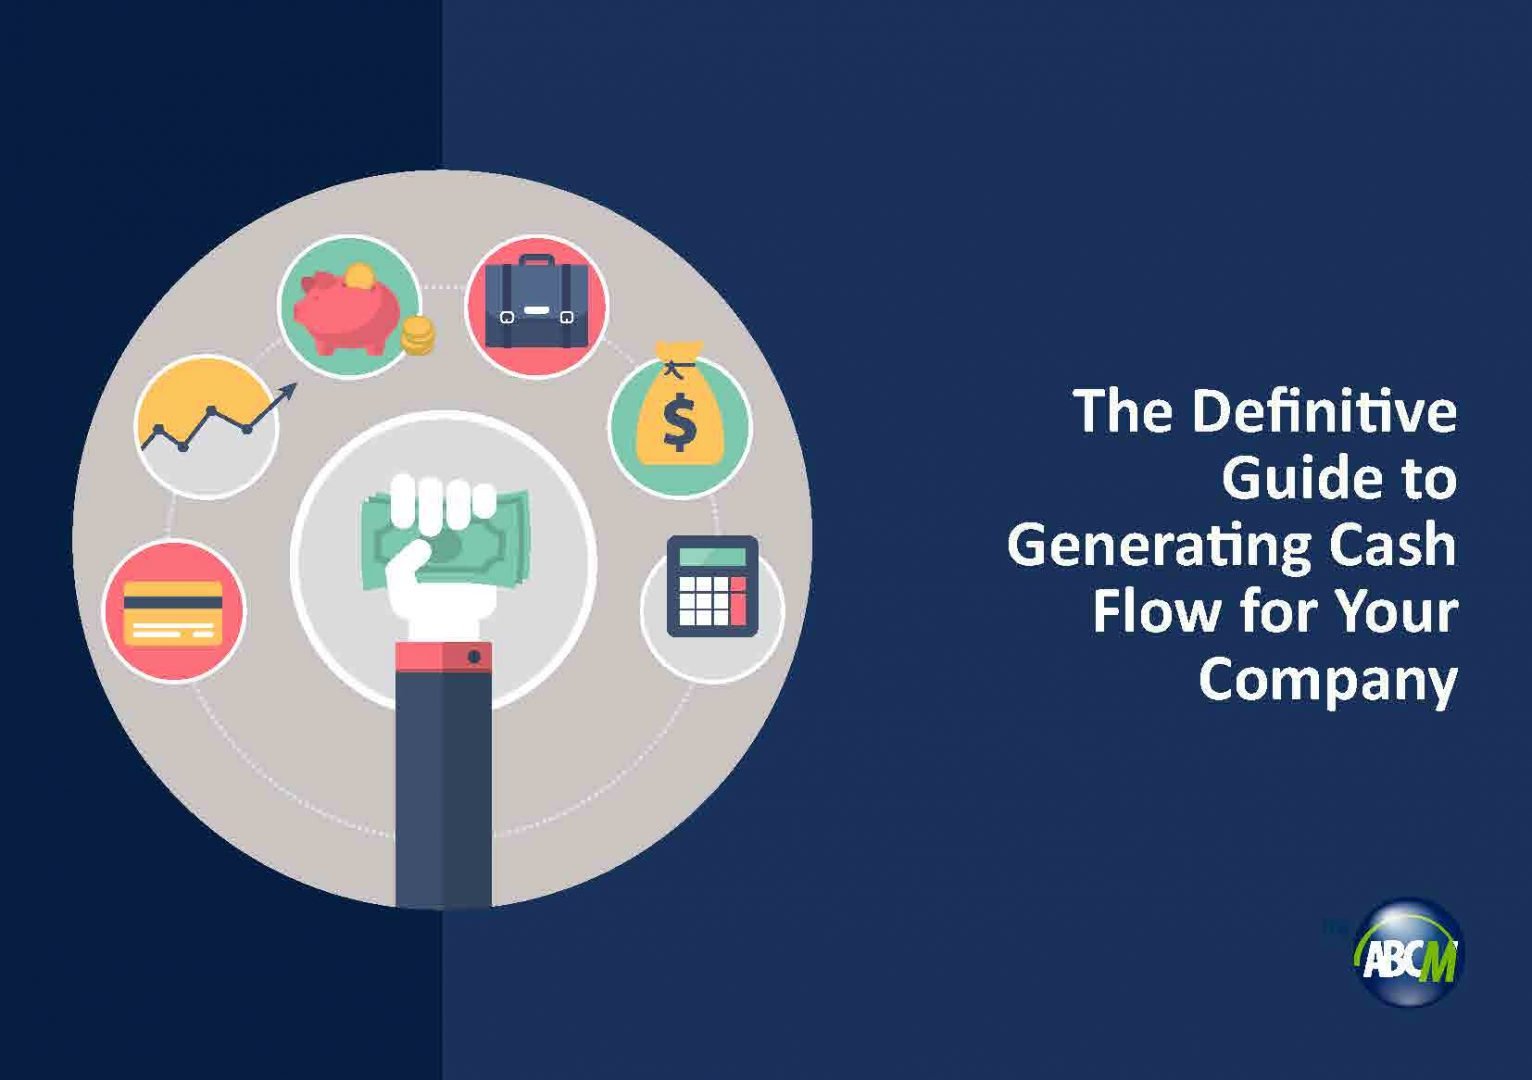 The Definitive Guide to Generating Cash Flow for Your Company